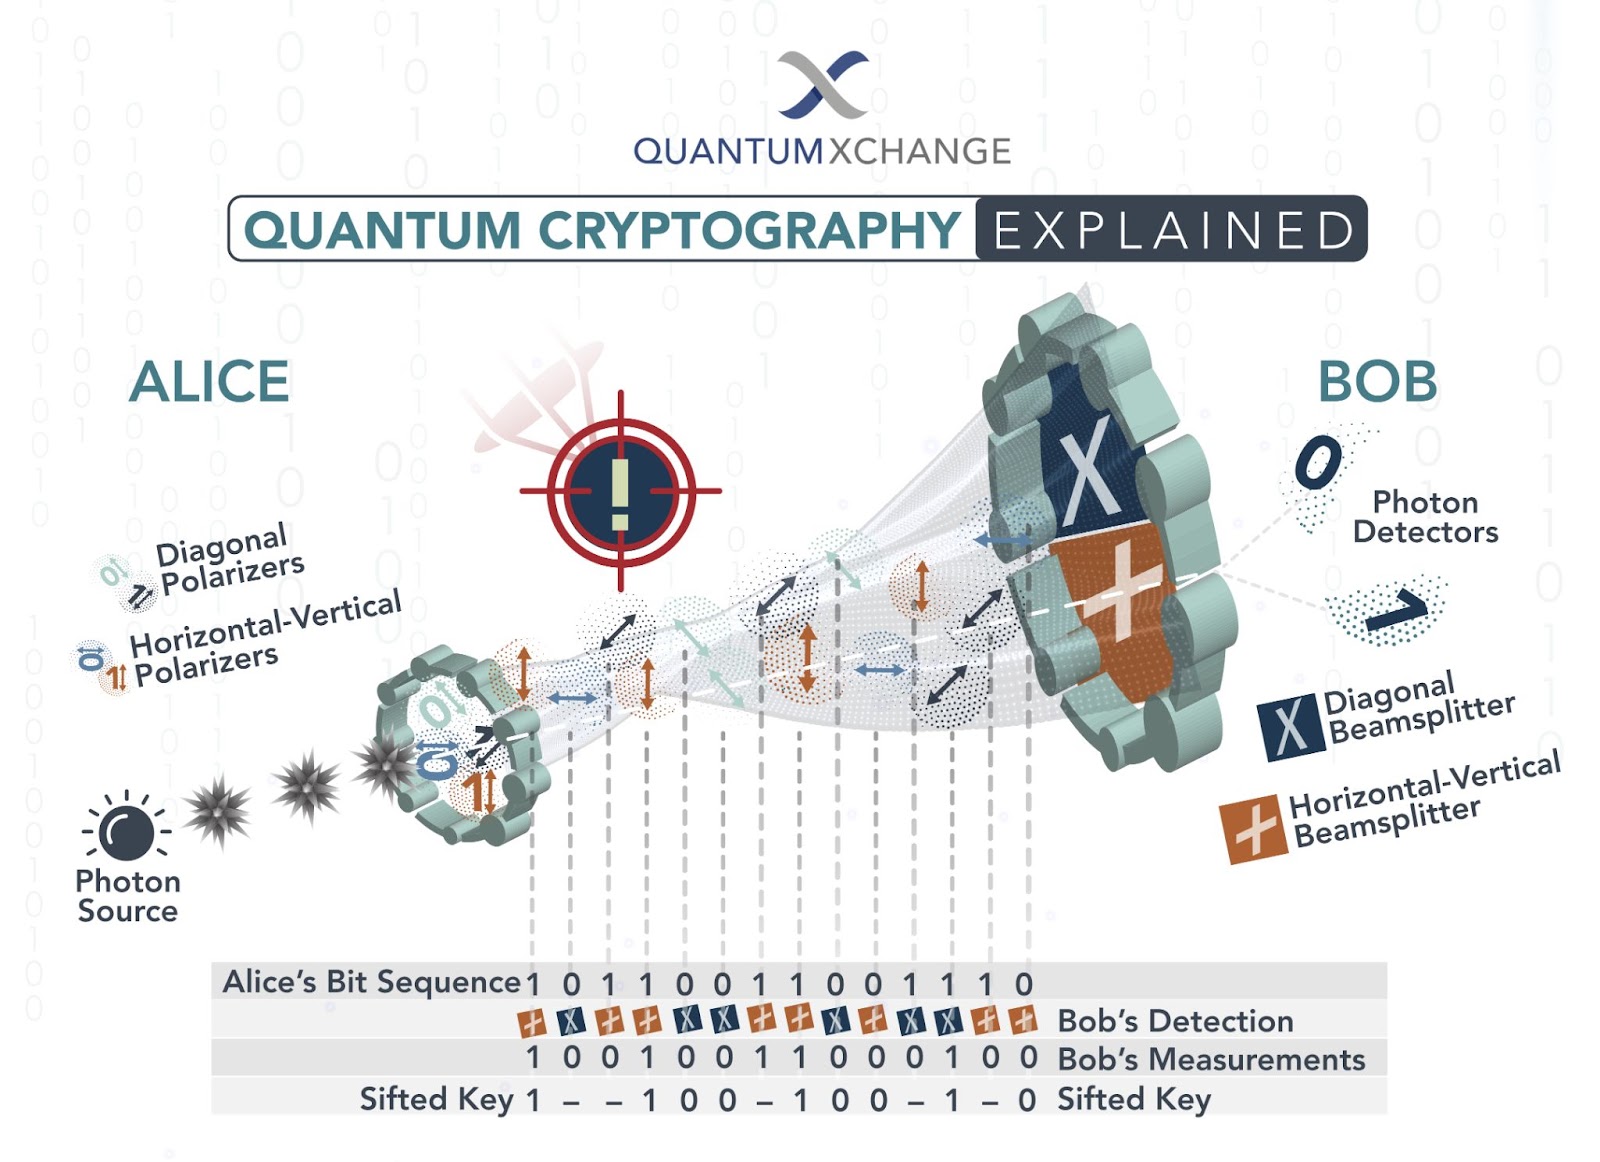 image 10 - Quantum Cryptography: Unbreakable Data Security